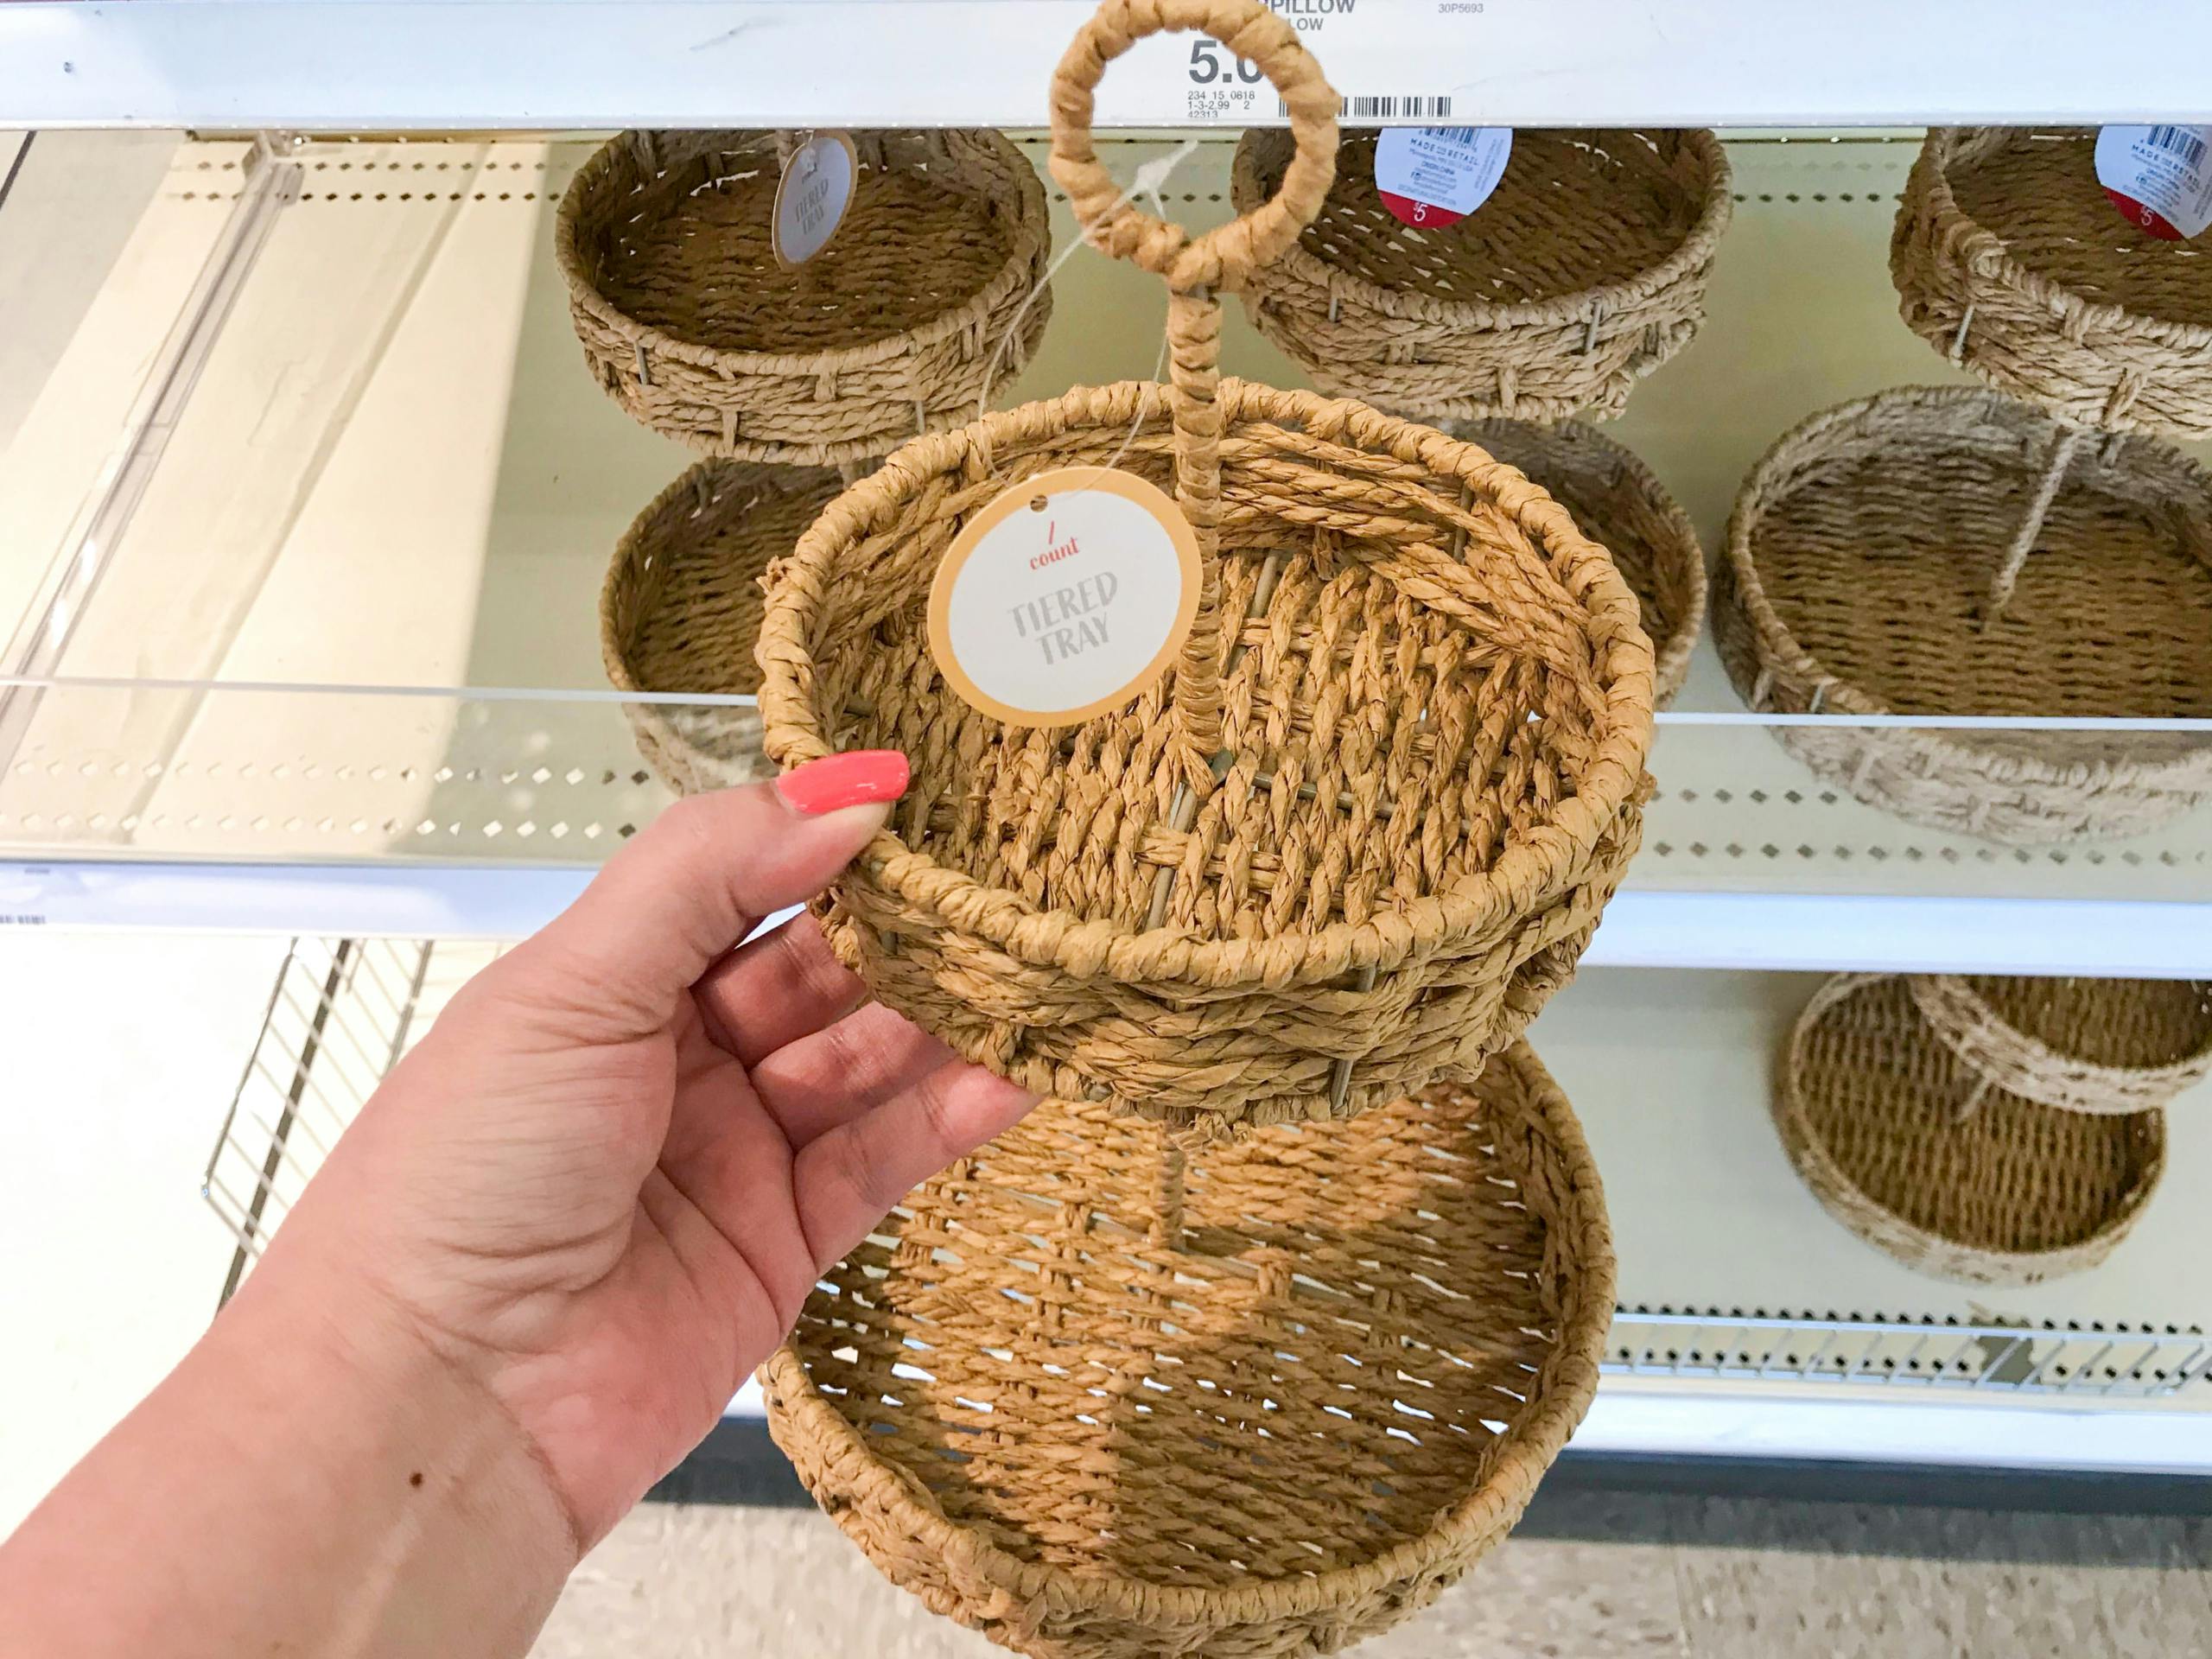 holding up rattan tray at Target